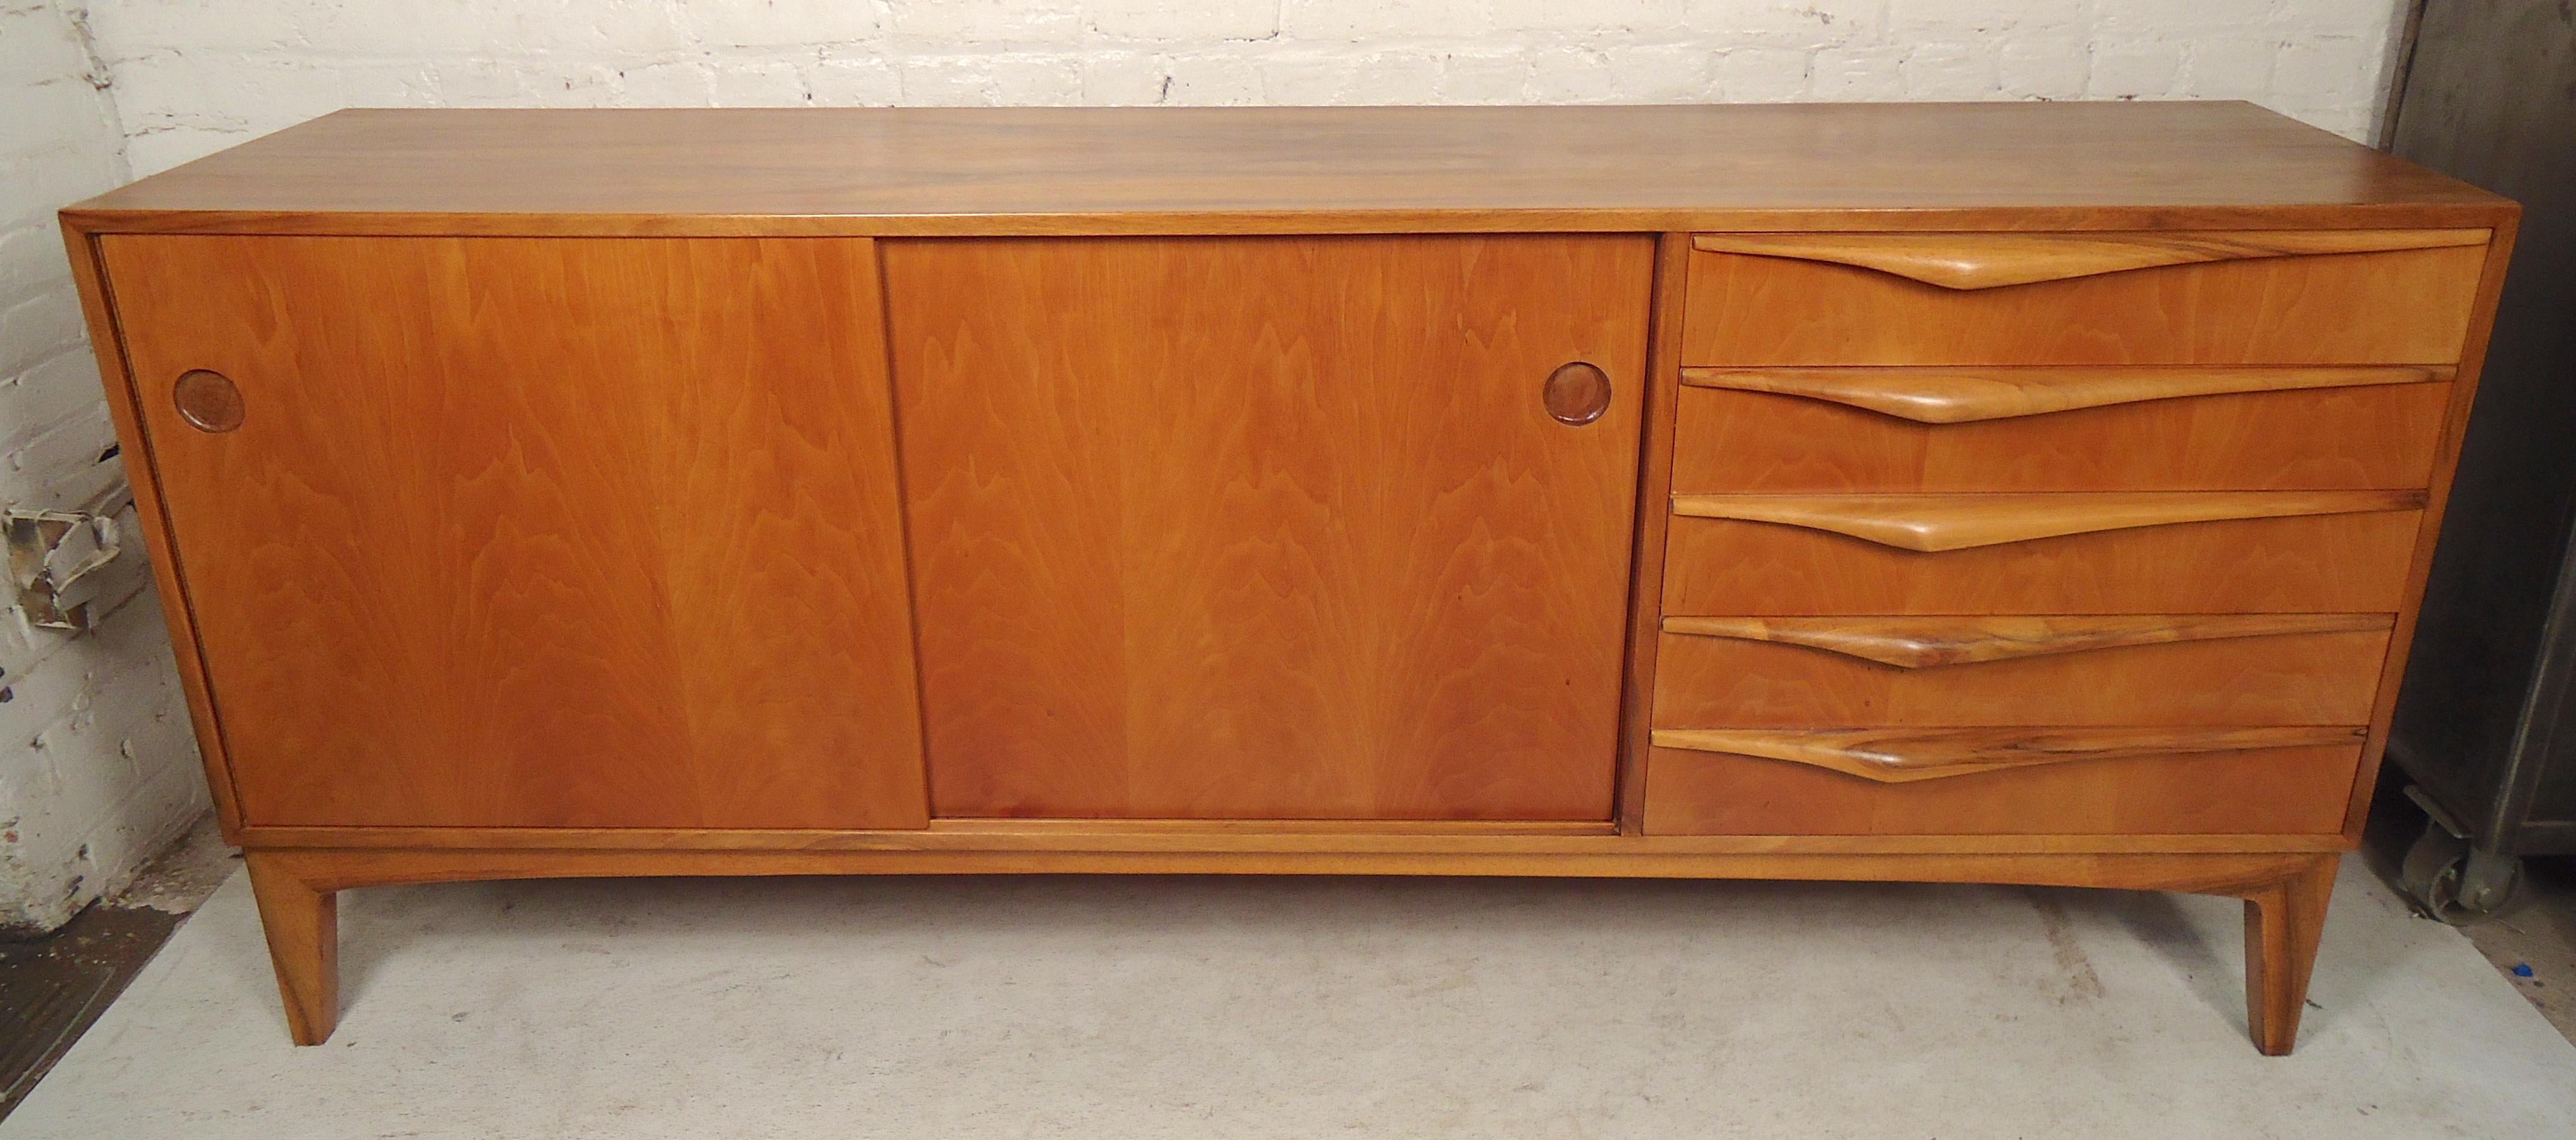 Stunning long server with sculpted handles and tapered legs. Open cabinet with shelves and five side drawers. Great for living room or bedroom storage.

(Please confirm item location - NY or NJ - with dealer).
  